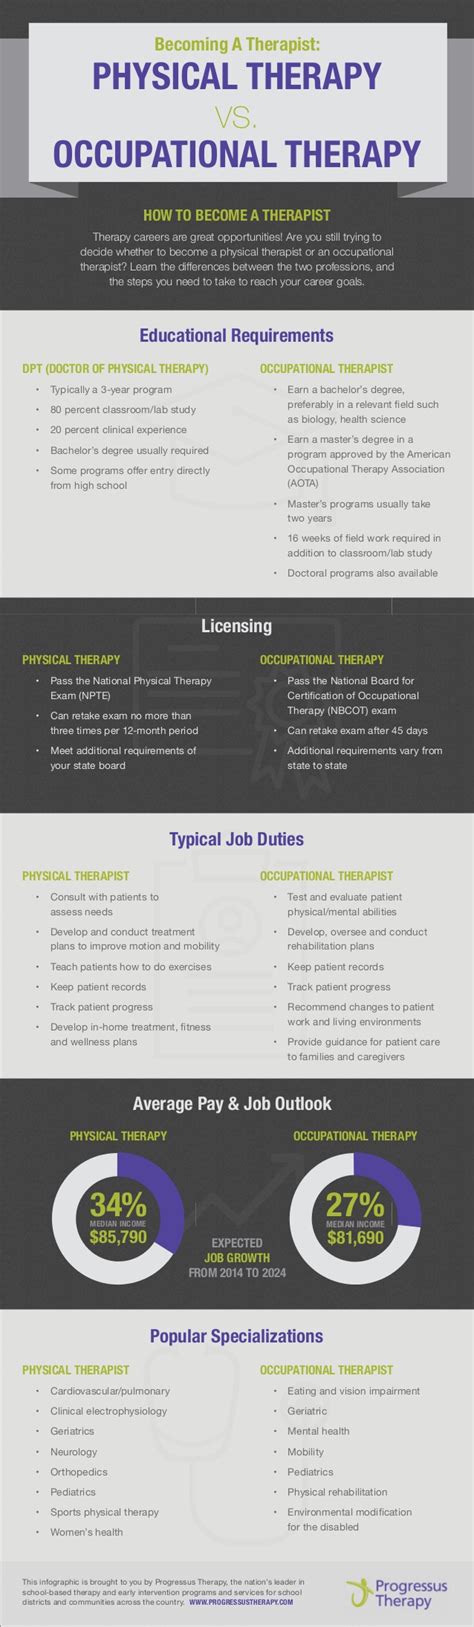 Education And Training Requirements For Occupational Therapist Tiedun